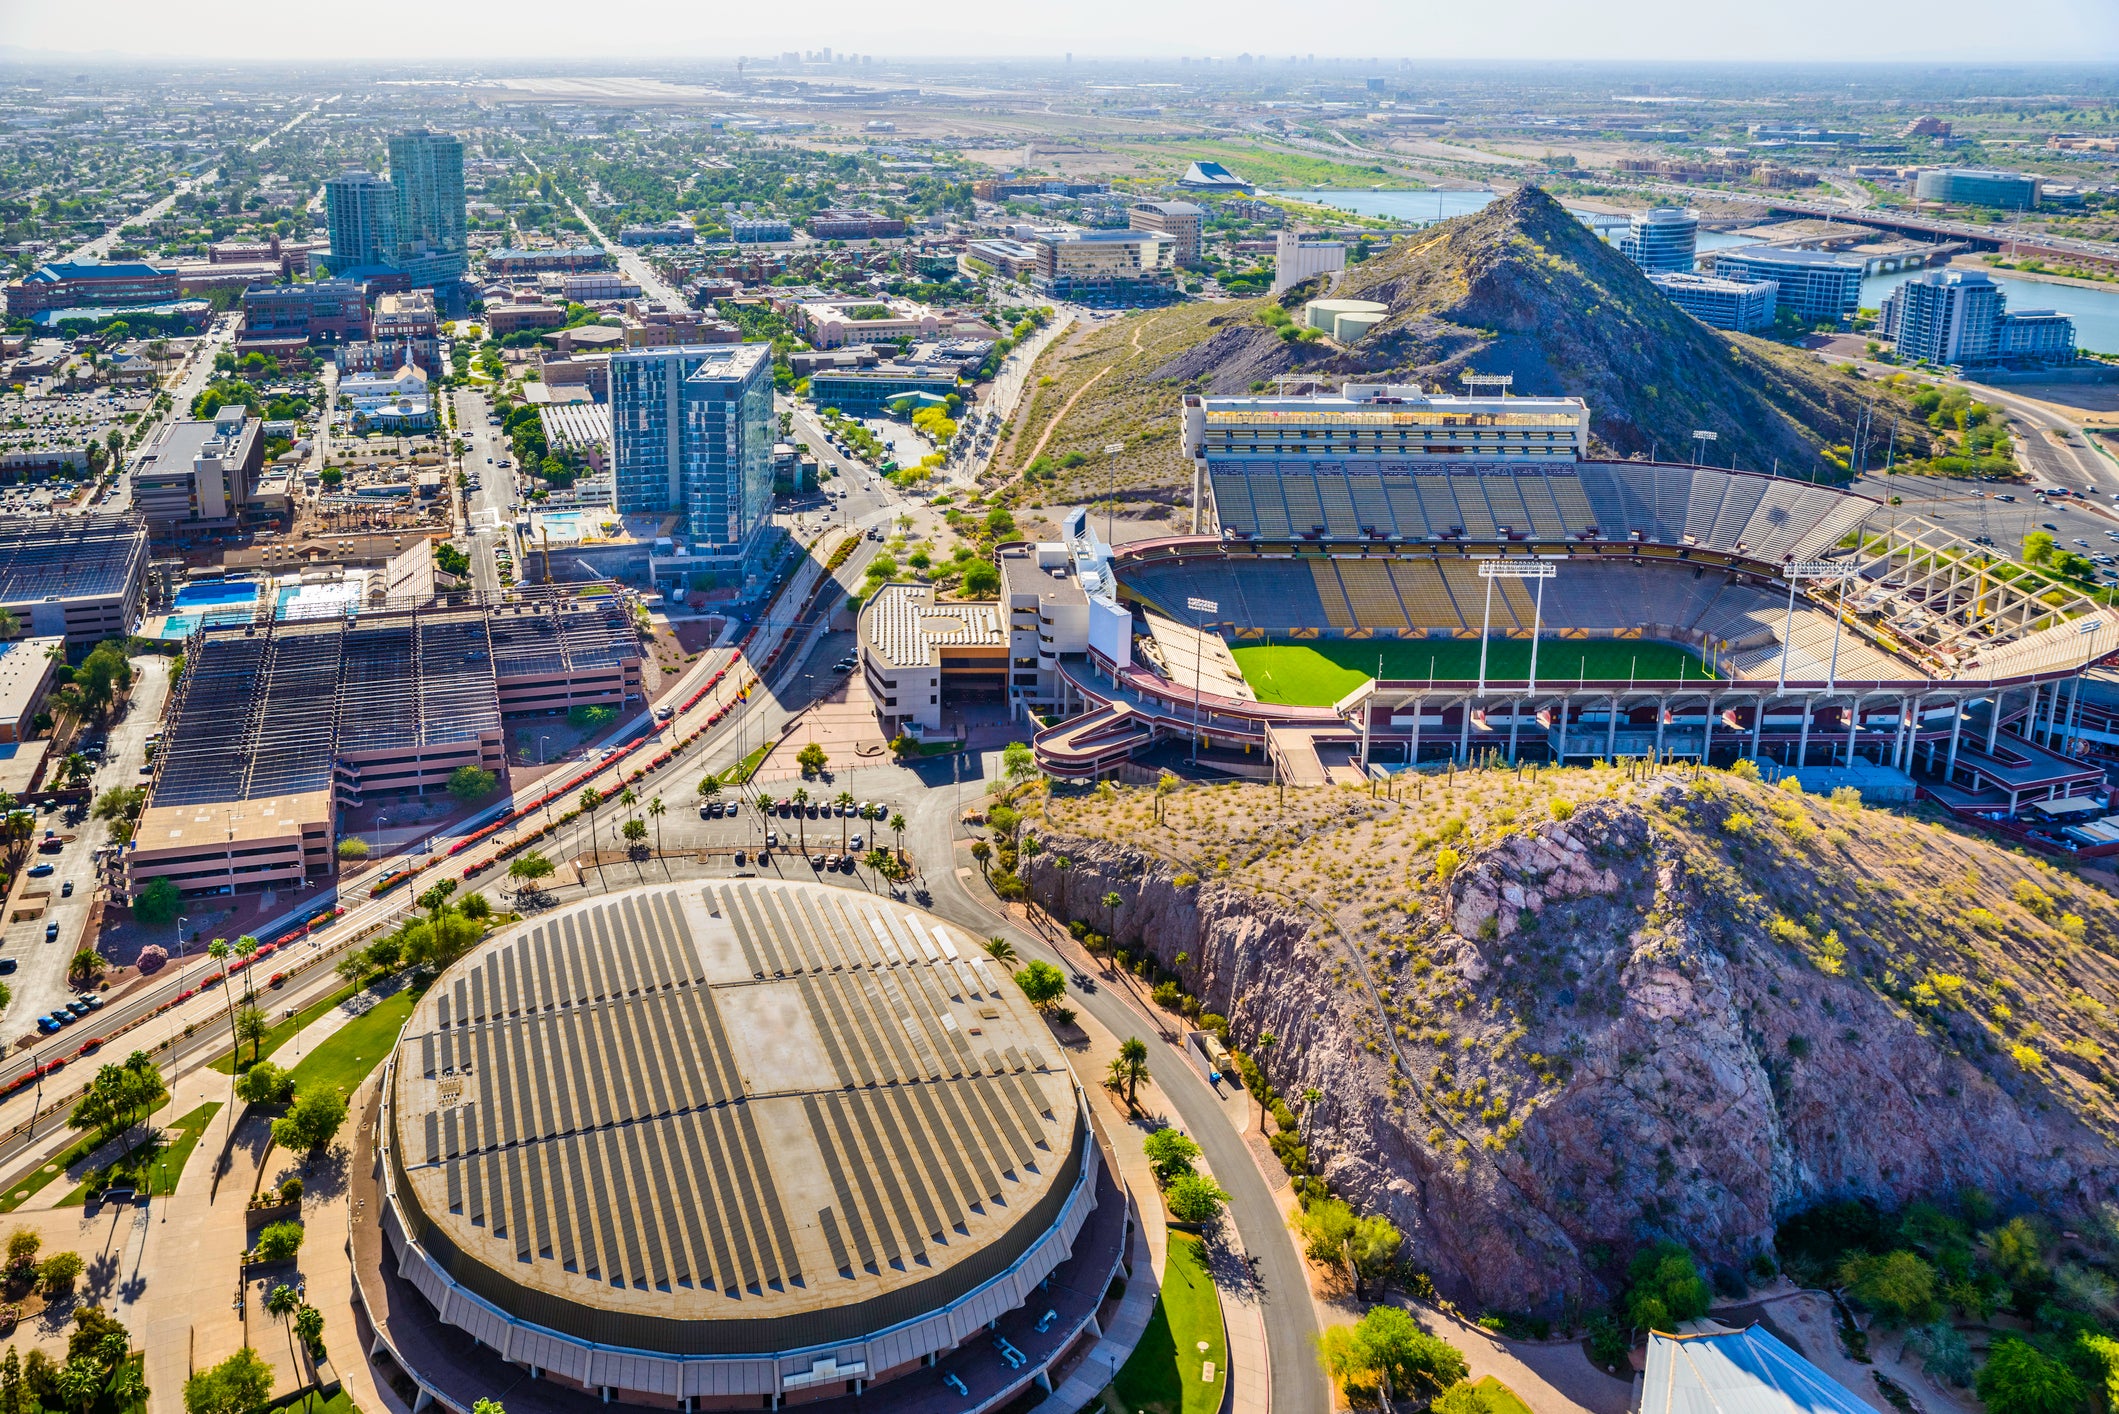 Skyline panoramic aerial helicopter view of Tempe, Arizona, showing ASU Arizona State University campus with Sun Devil Football Stadium (Frank Kush Field) on middle right.